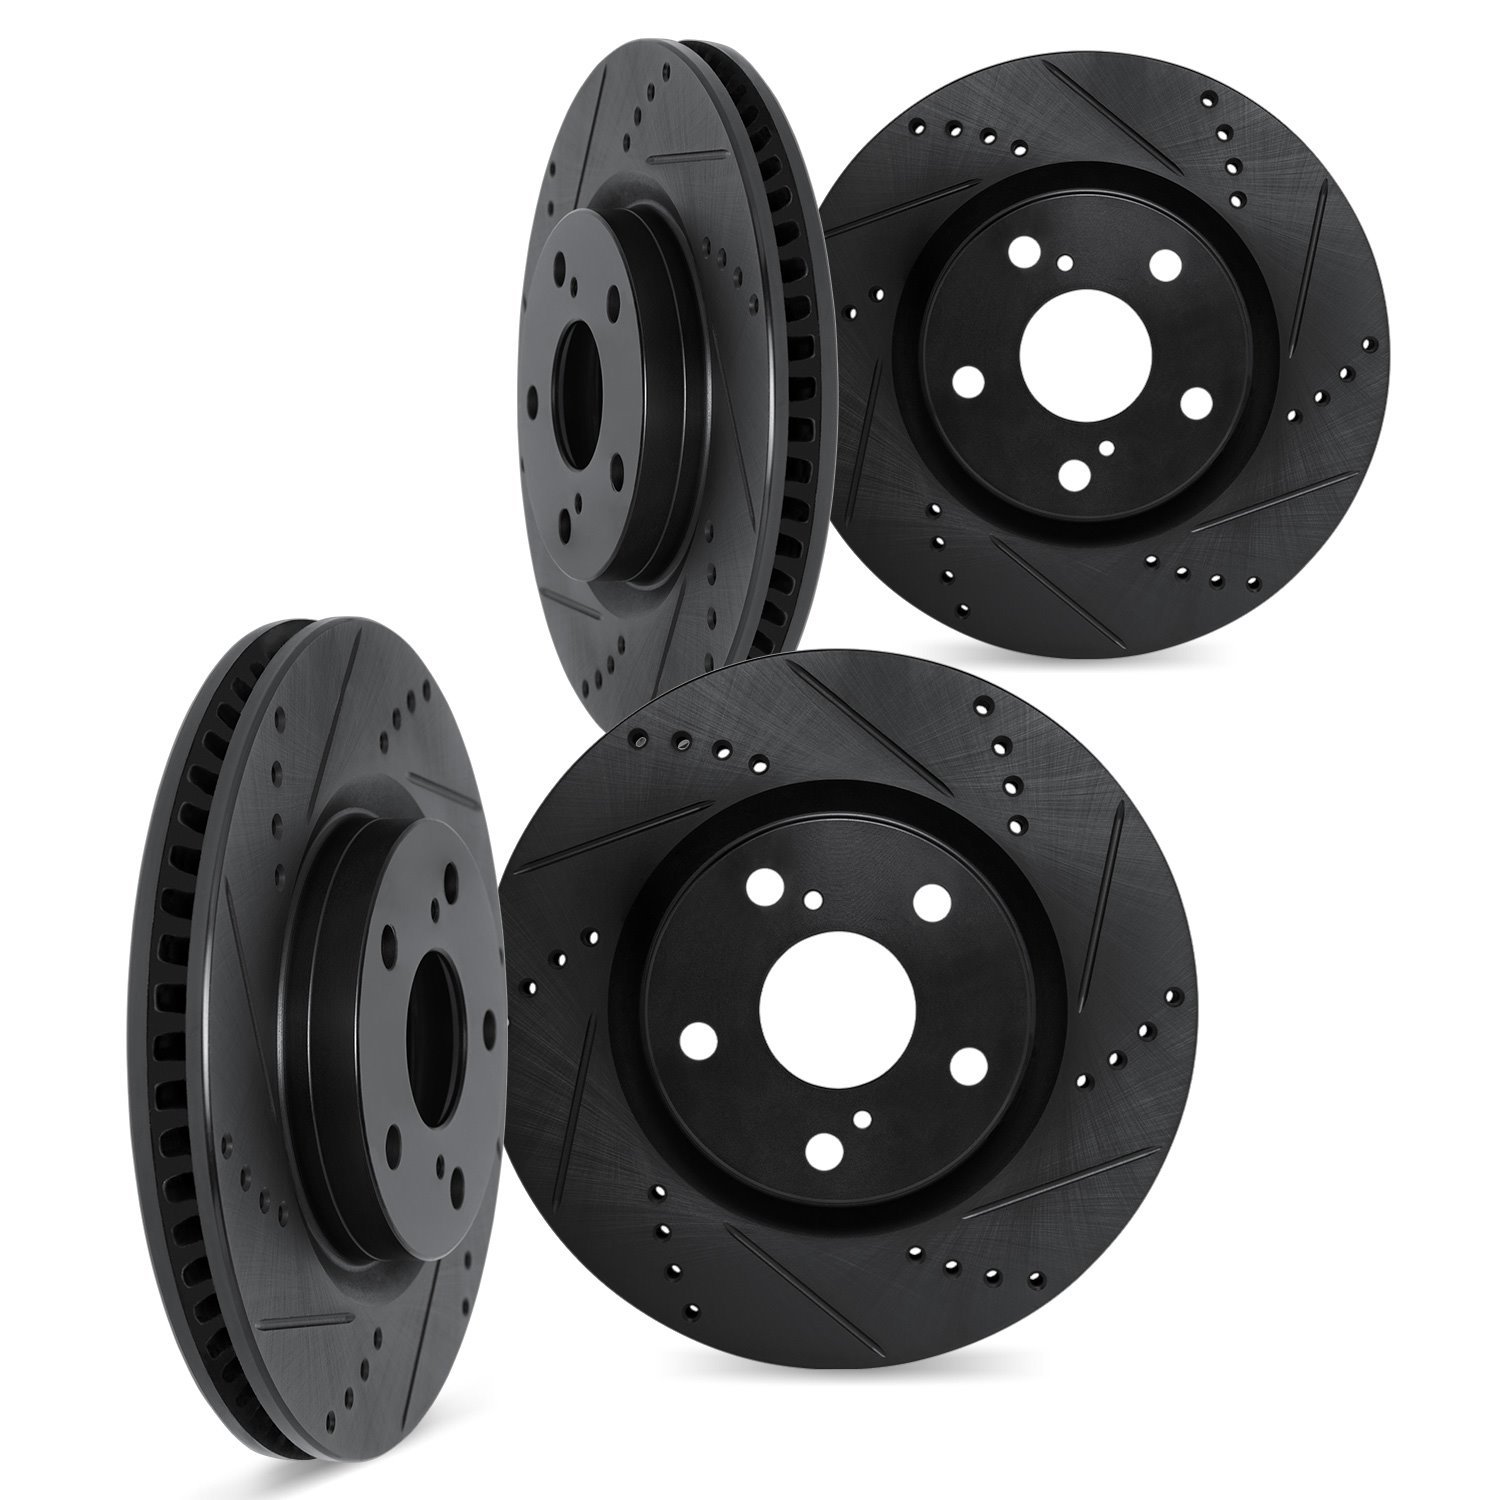 8004-68008 Drilled/Slotted Brake Rotors [Black], Fits Select Infiniti/Nissan, Position: Front and Rear